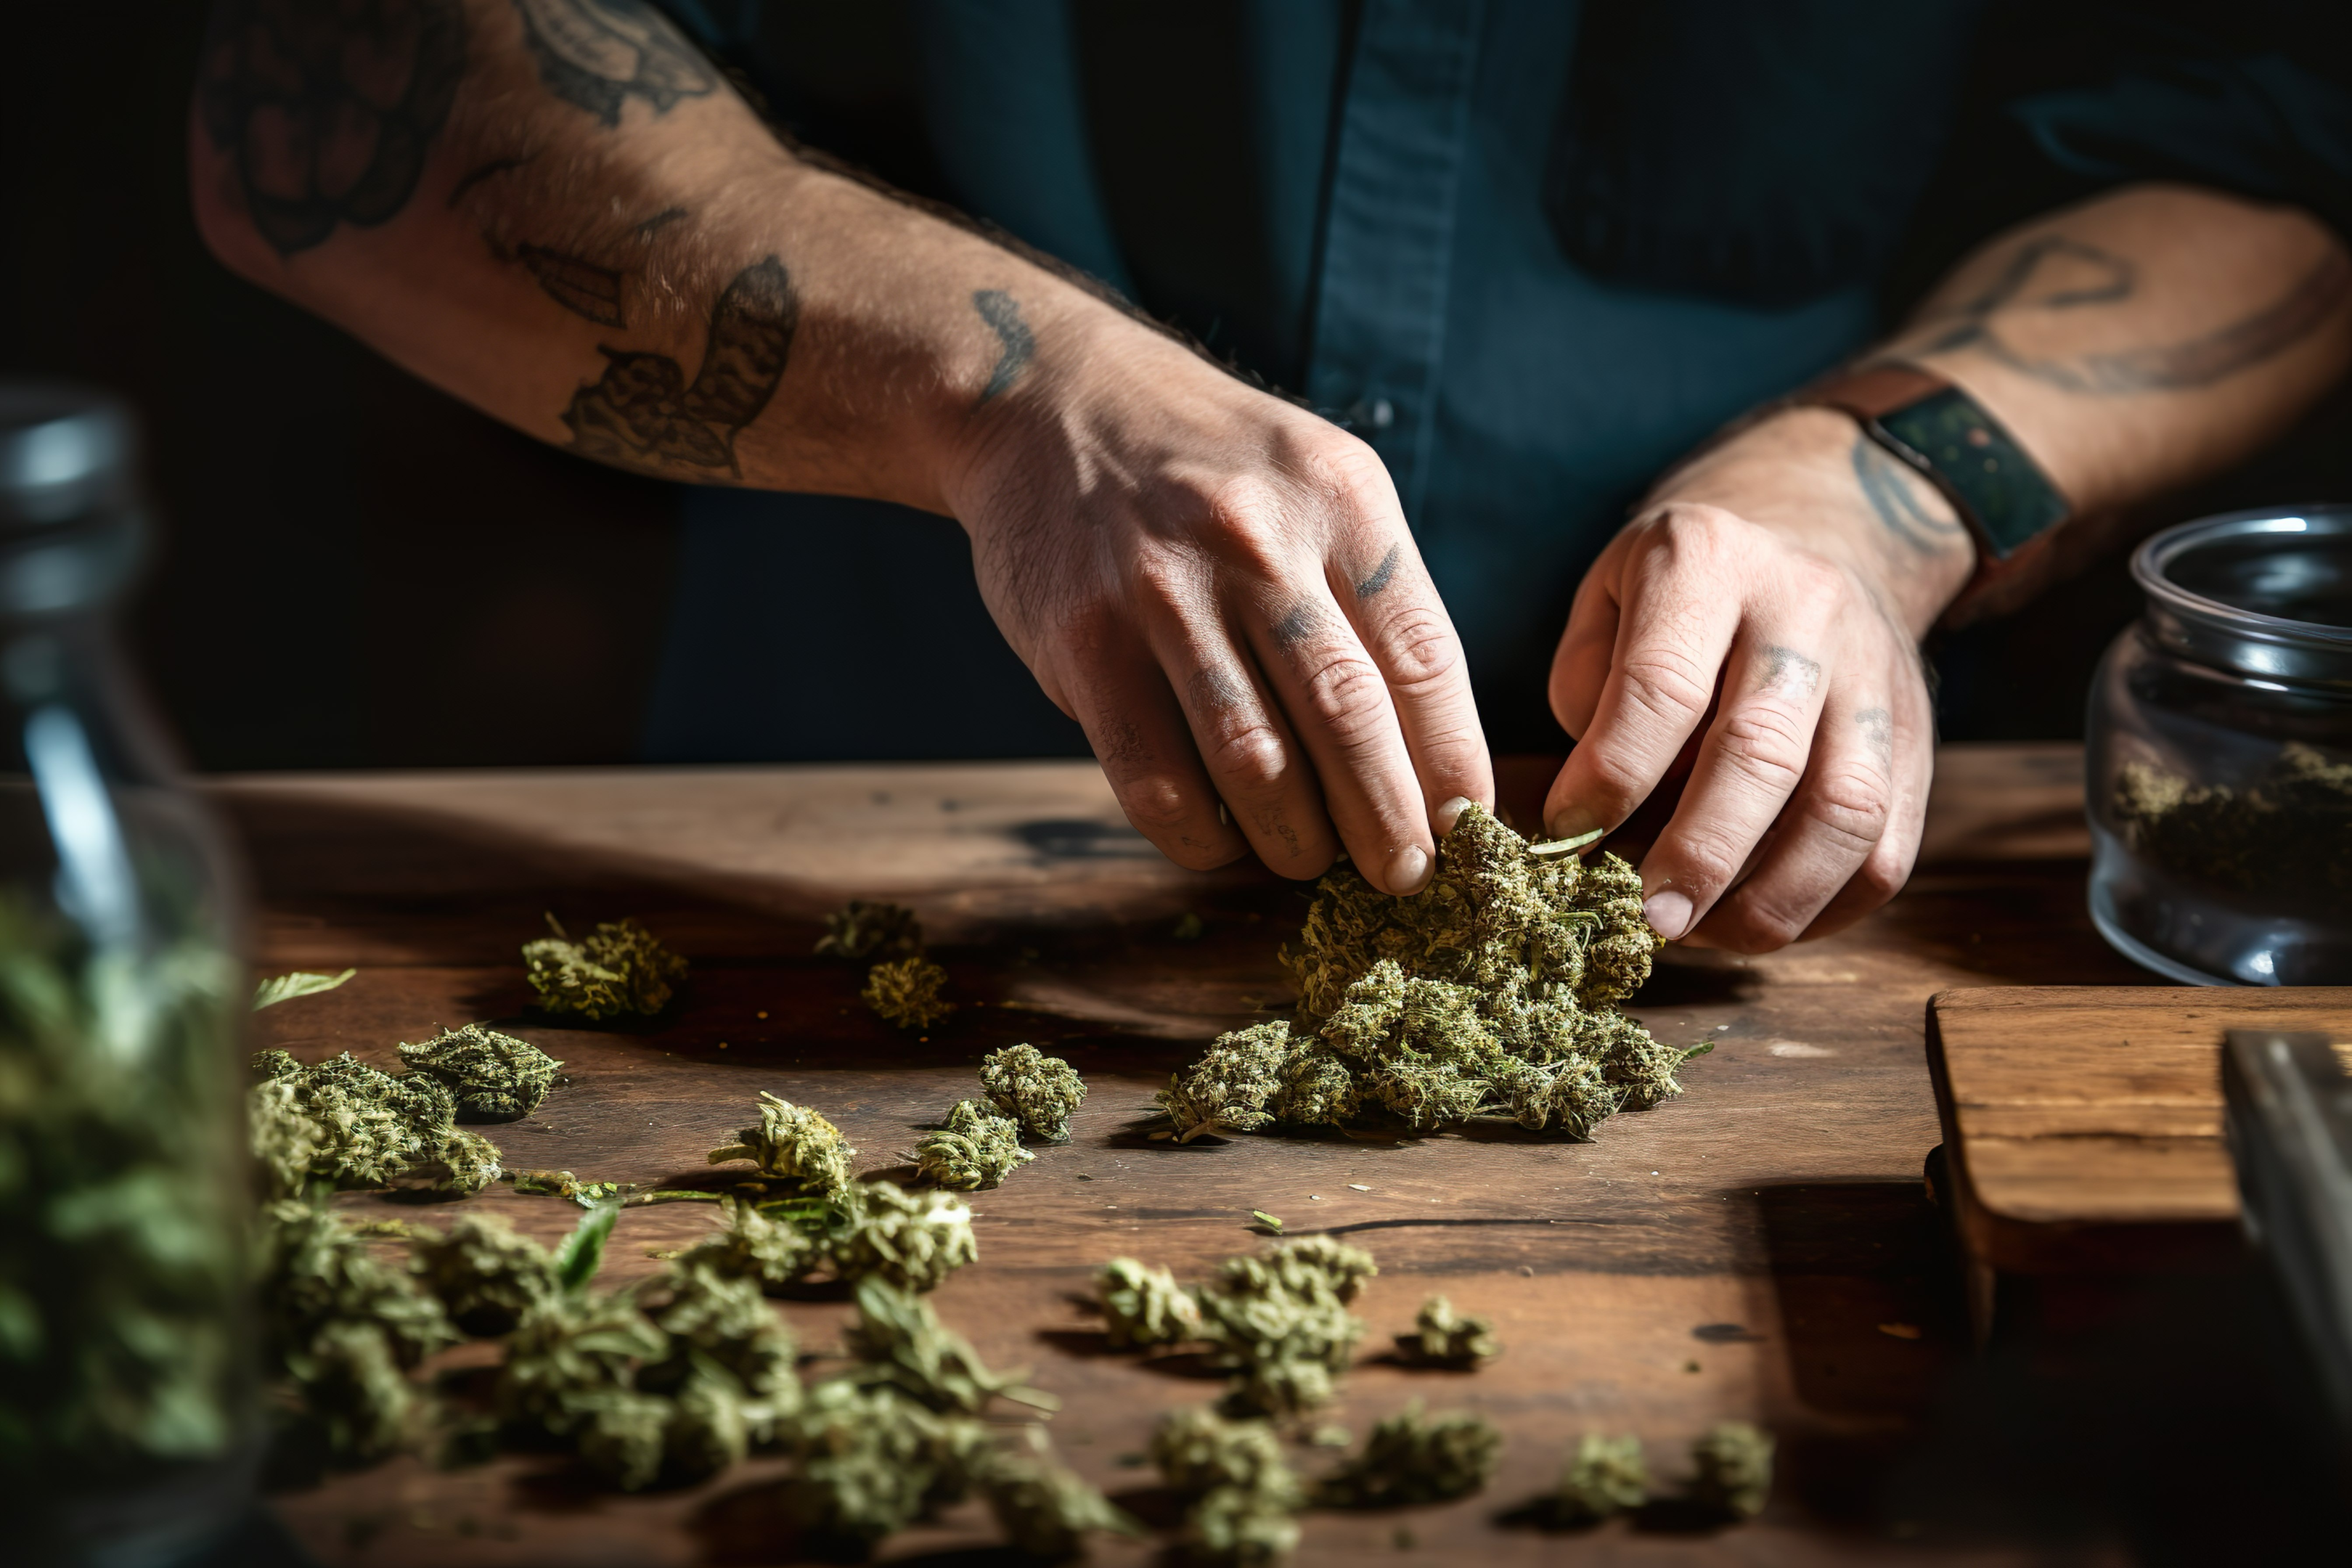 Working with cannabis can be a fun way to enhance and expand your world and flavors of food.